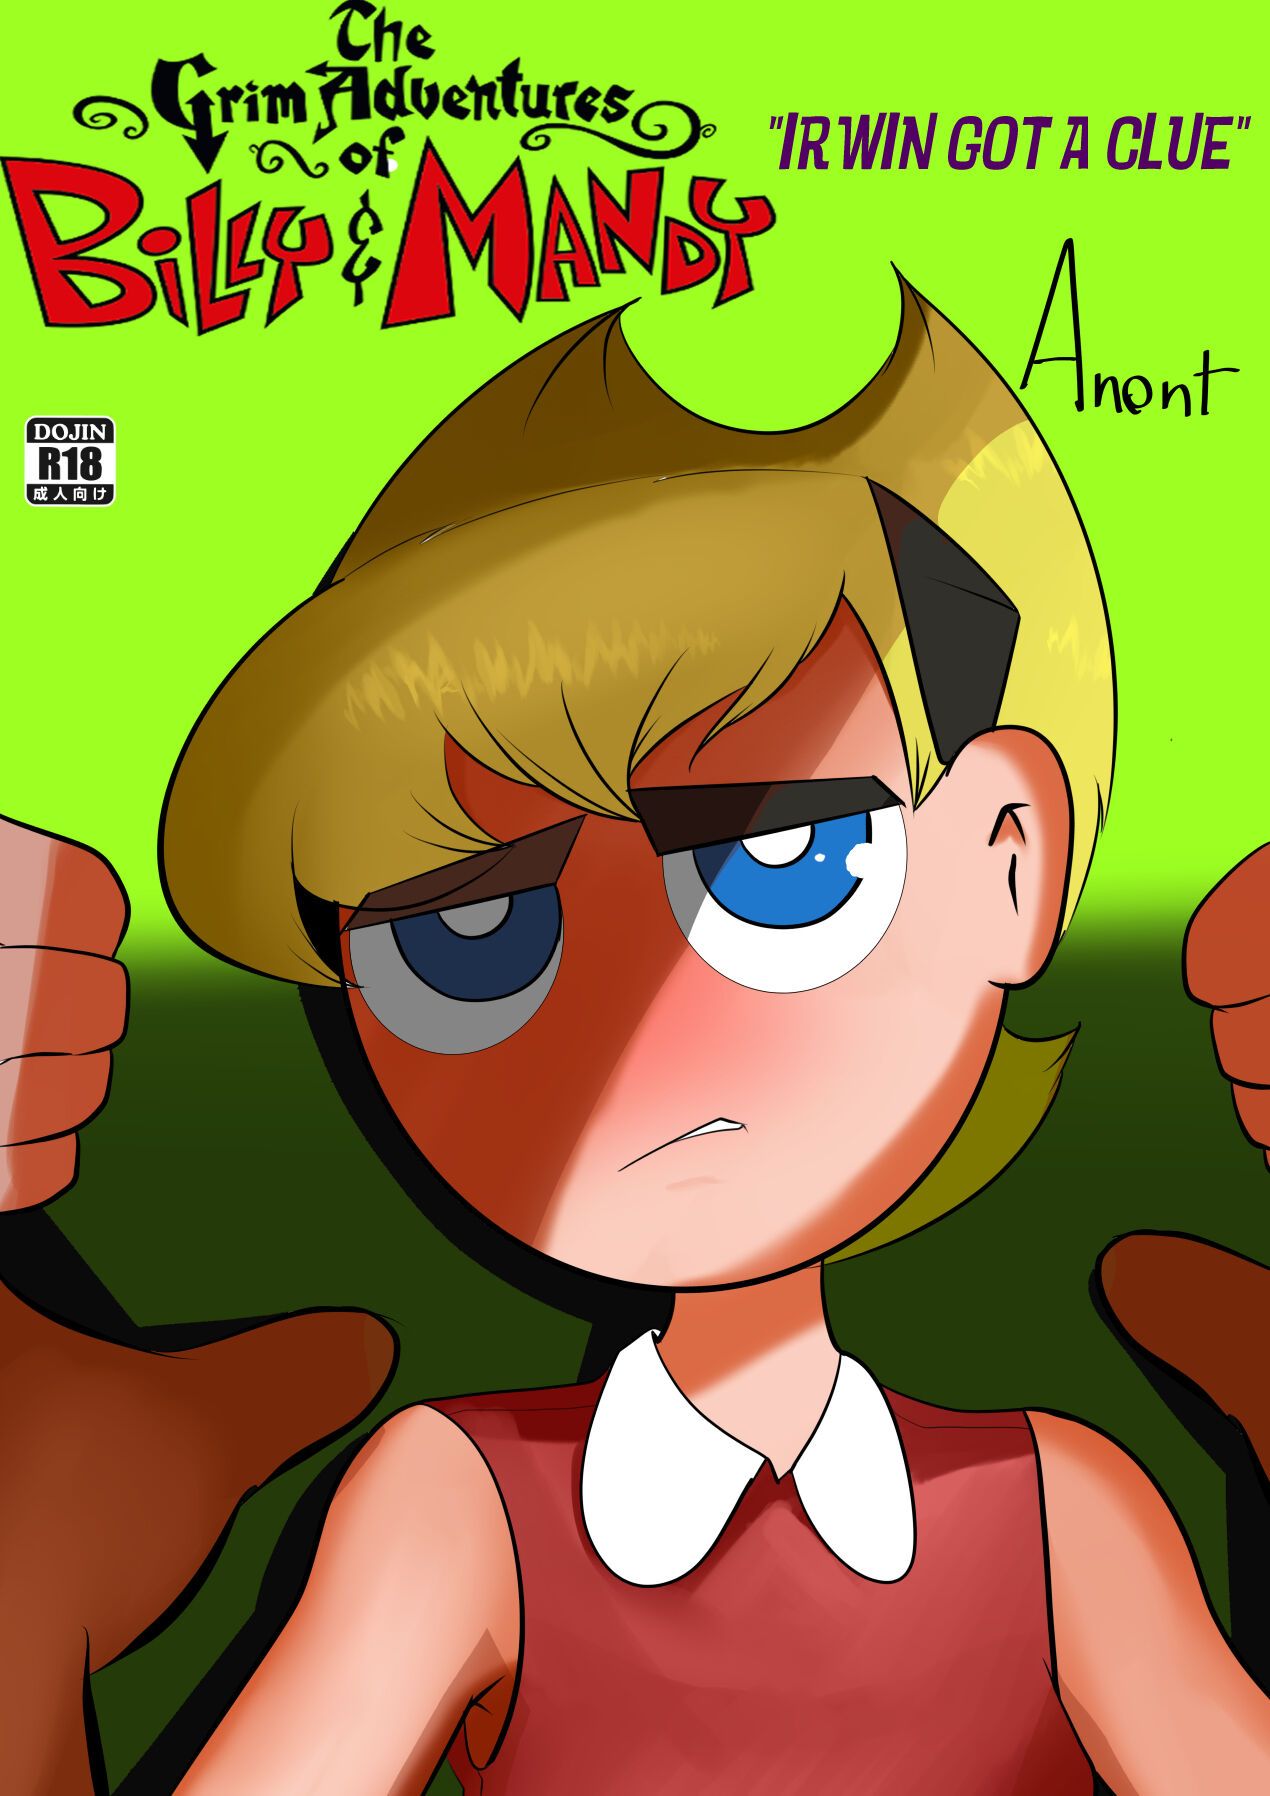 The Grim adventure of Billy and Mandy “Irwin Got a Clue” [Anont]